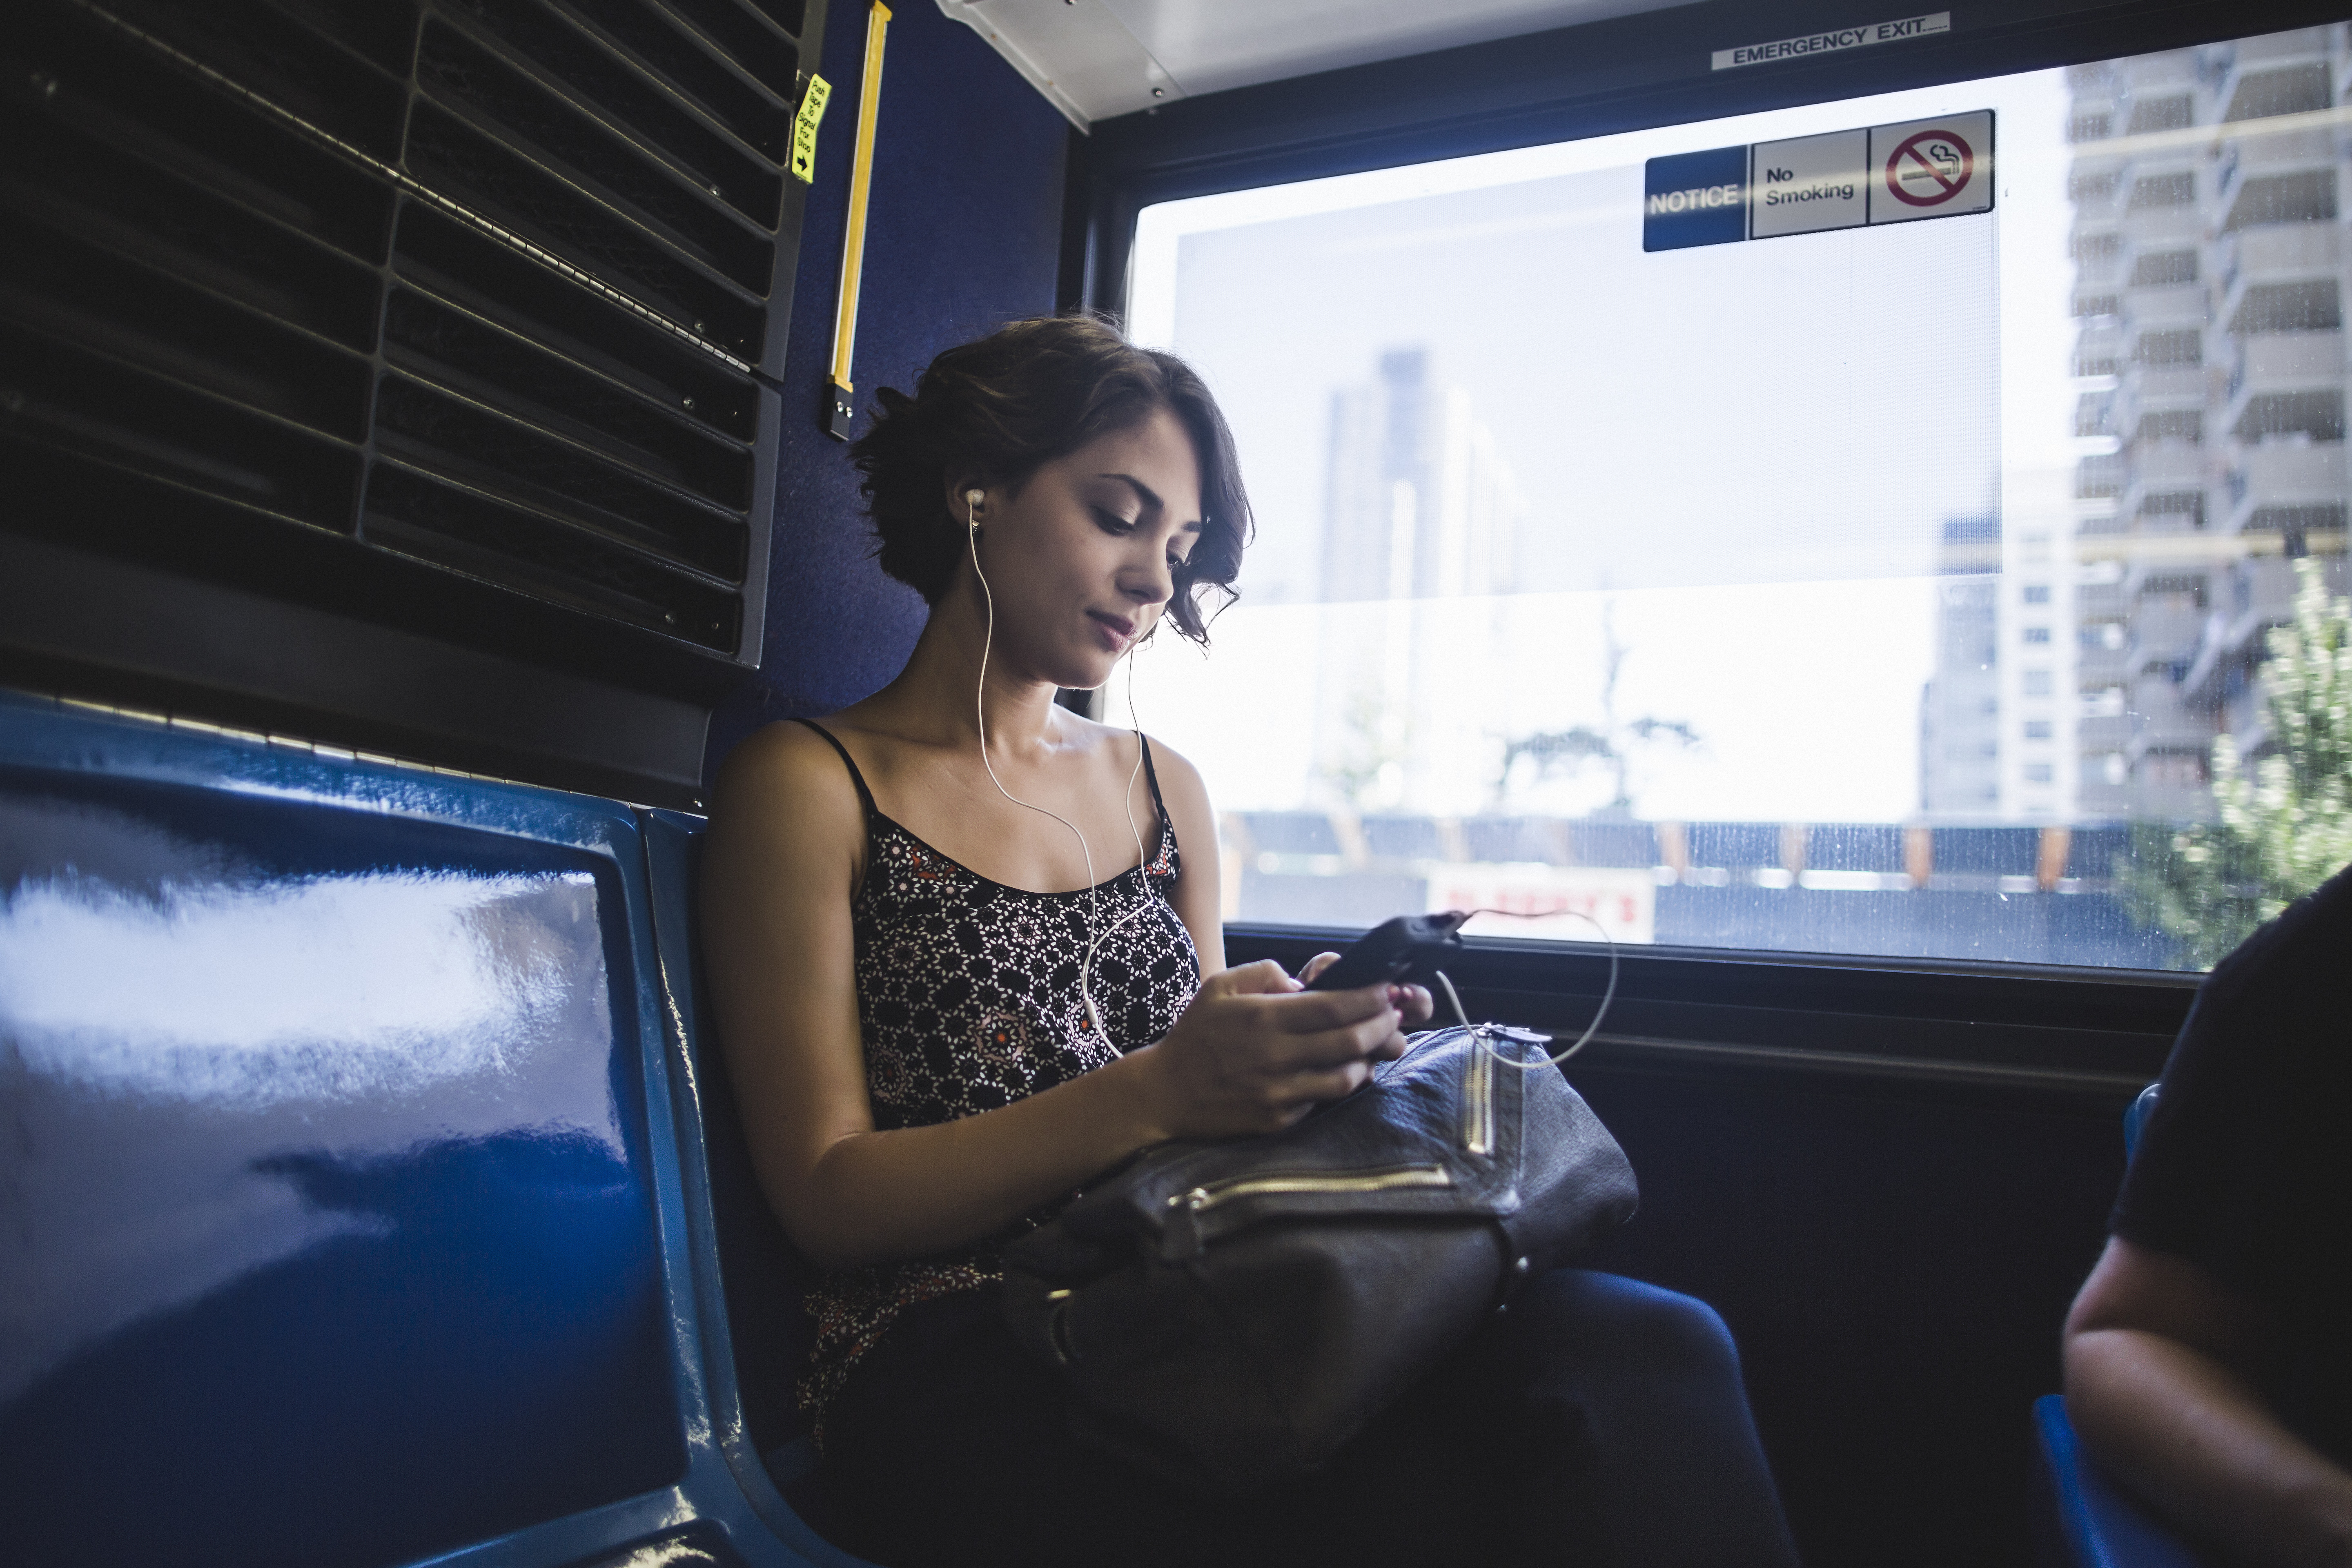 Young woman commuting on bus listening to music on smartphone. (Getty Images)